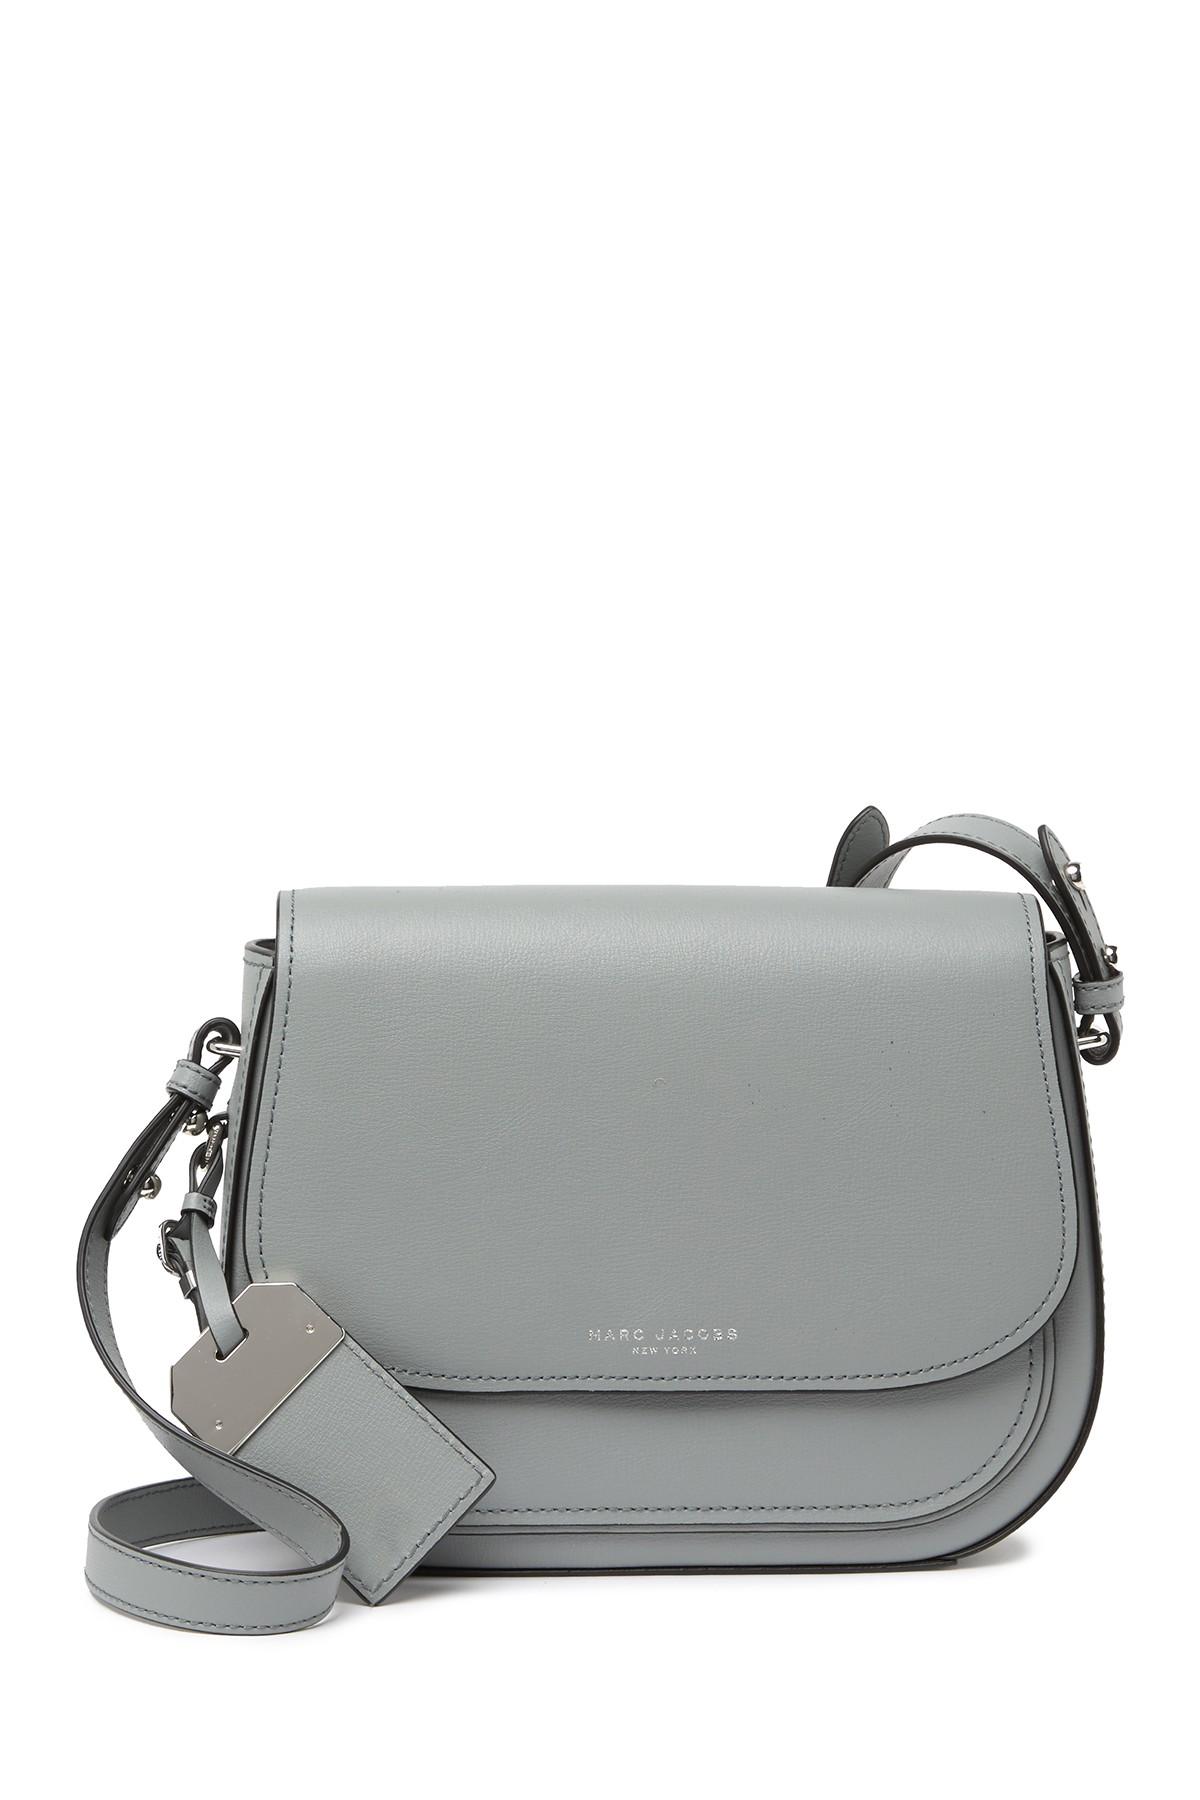 Marc Jacobs Rider Leather Crossbody Bag - Lyst